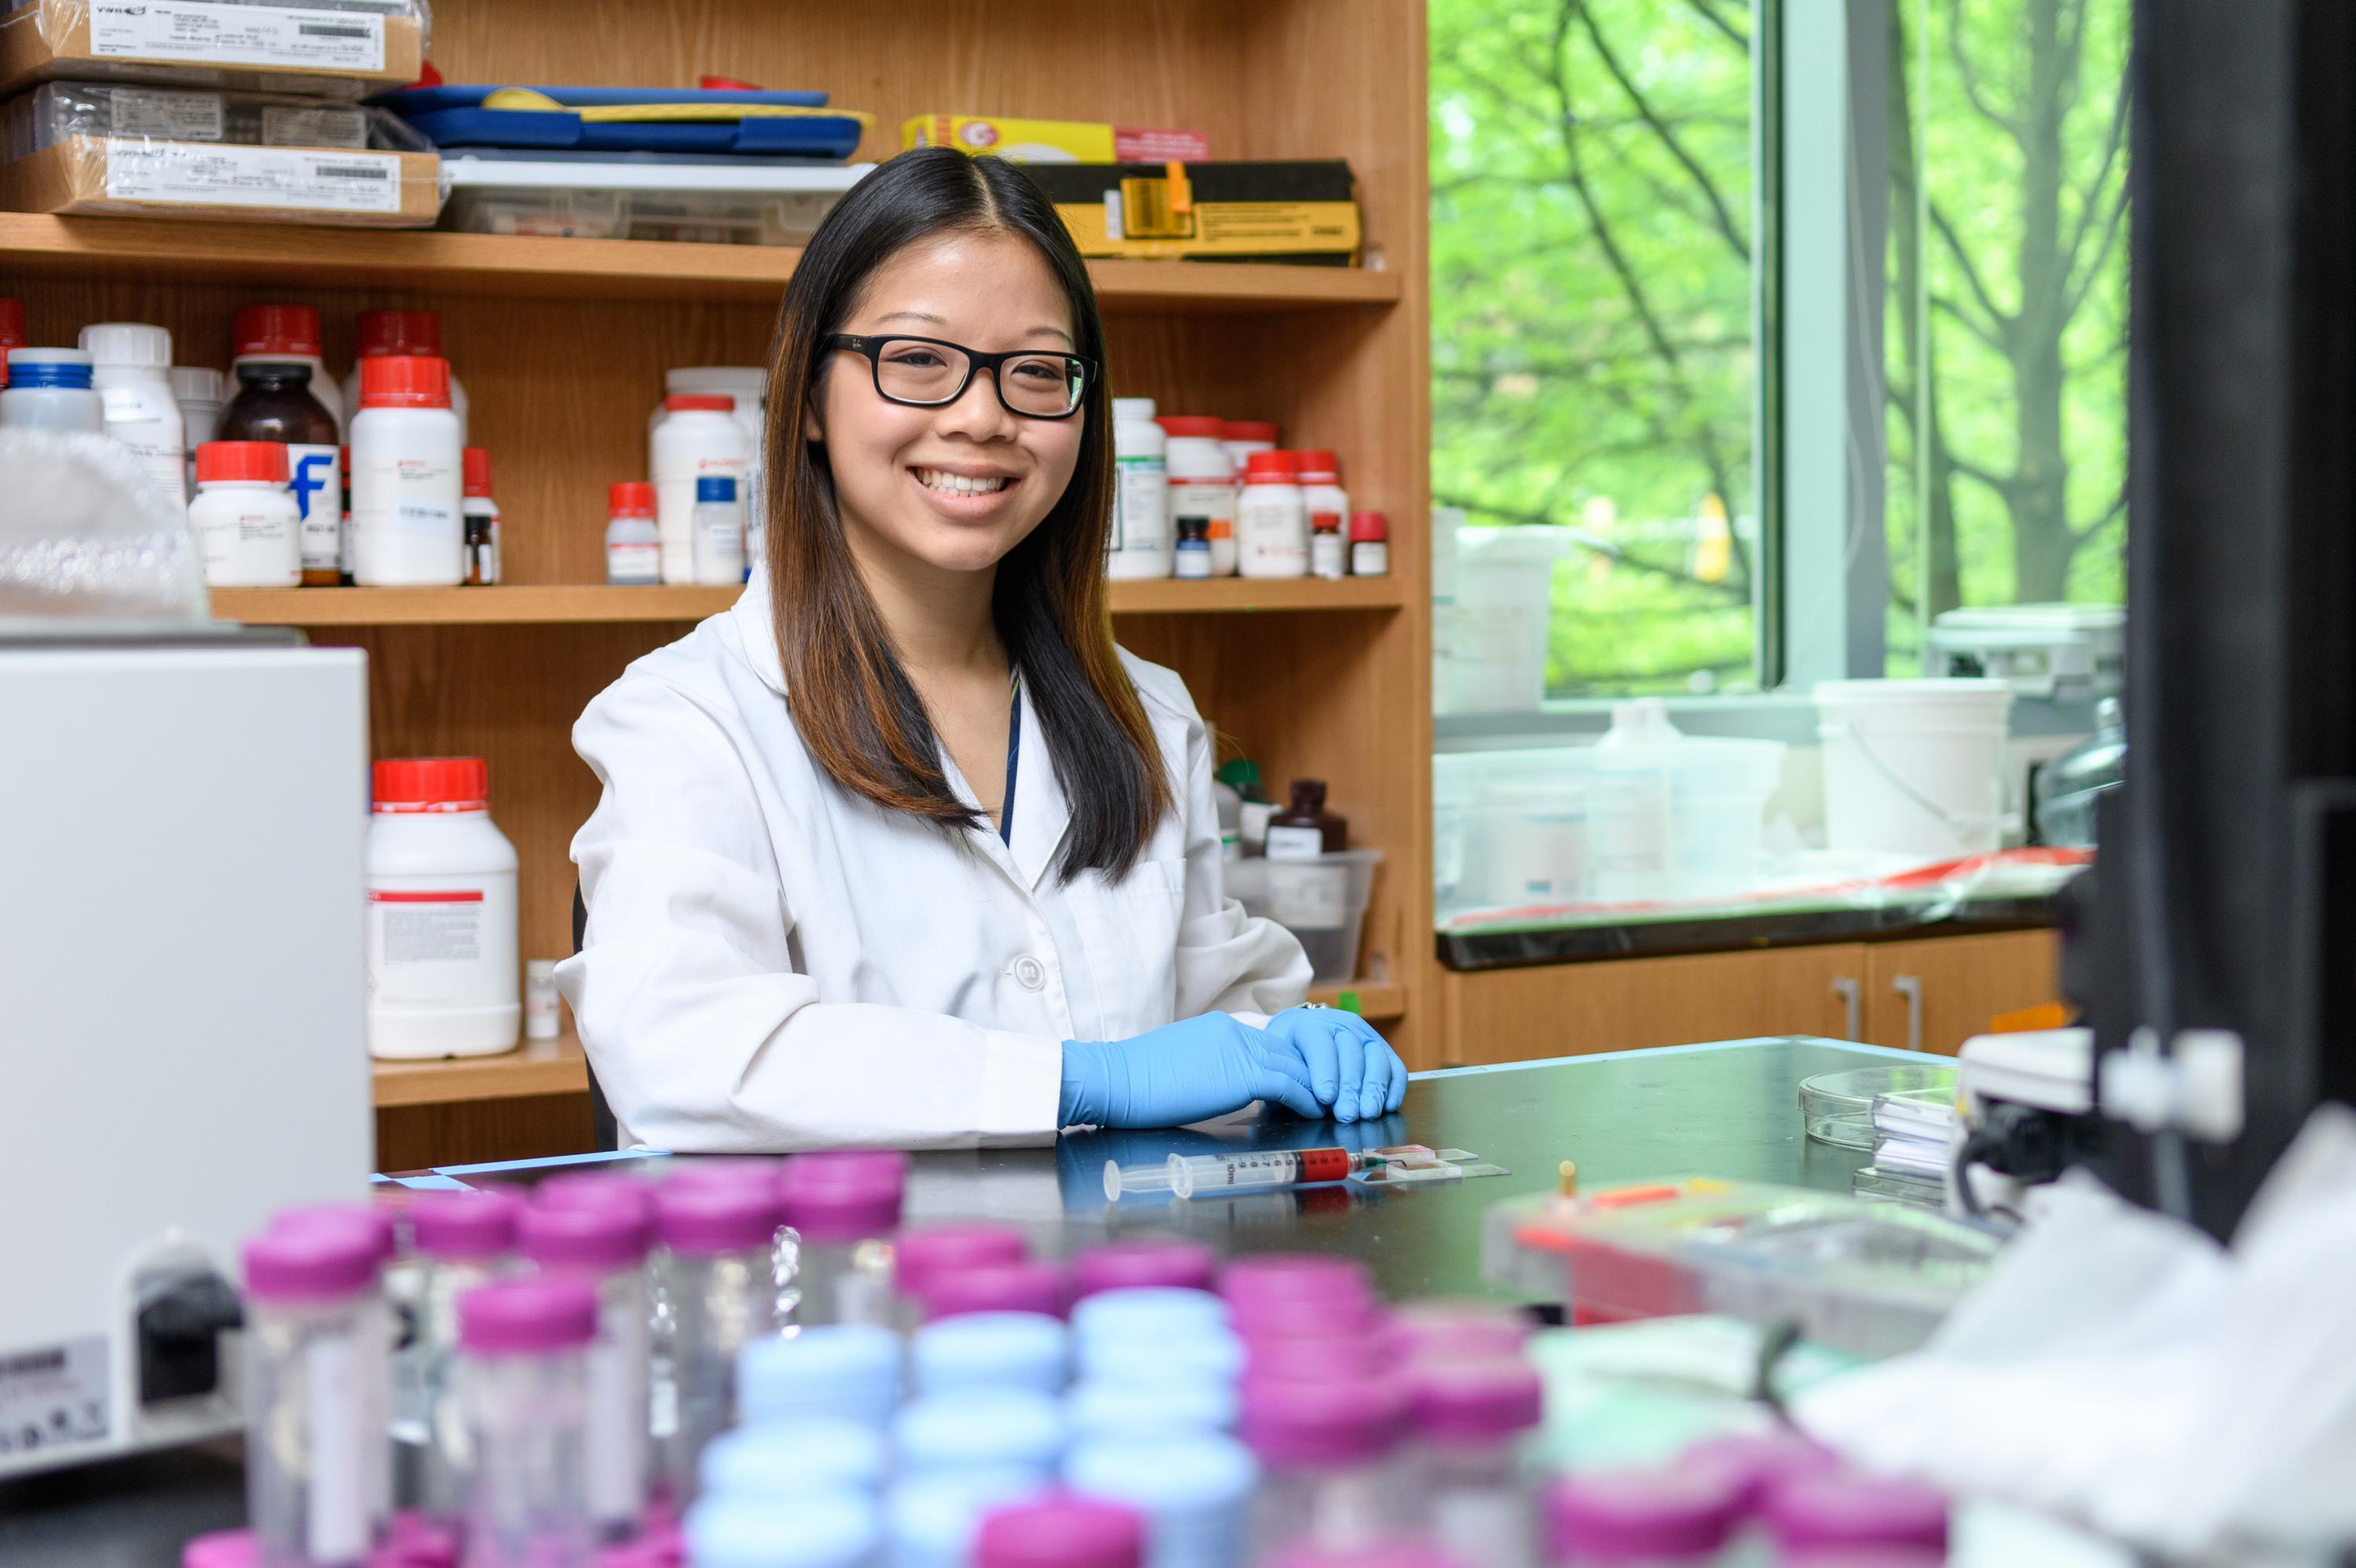 Researchers have developed a potentially new way to introduce macromolecules and therapeutic genes into human cells. Shown is National Science Foundation Graduate Research Fellow Anna Liu. (Credit: Rob Felt, Georgia Tech)